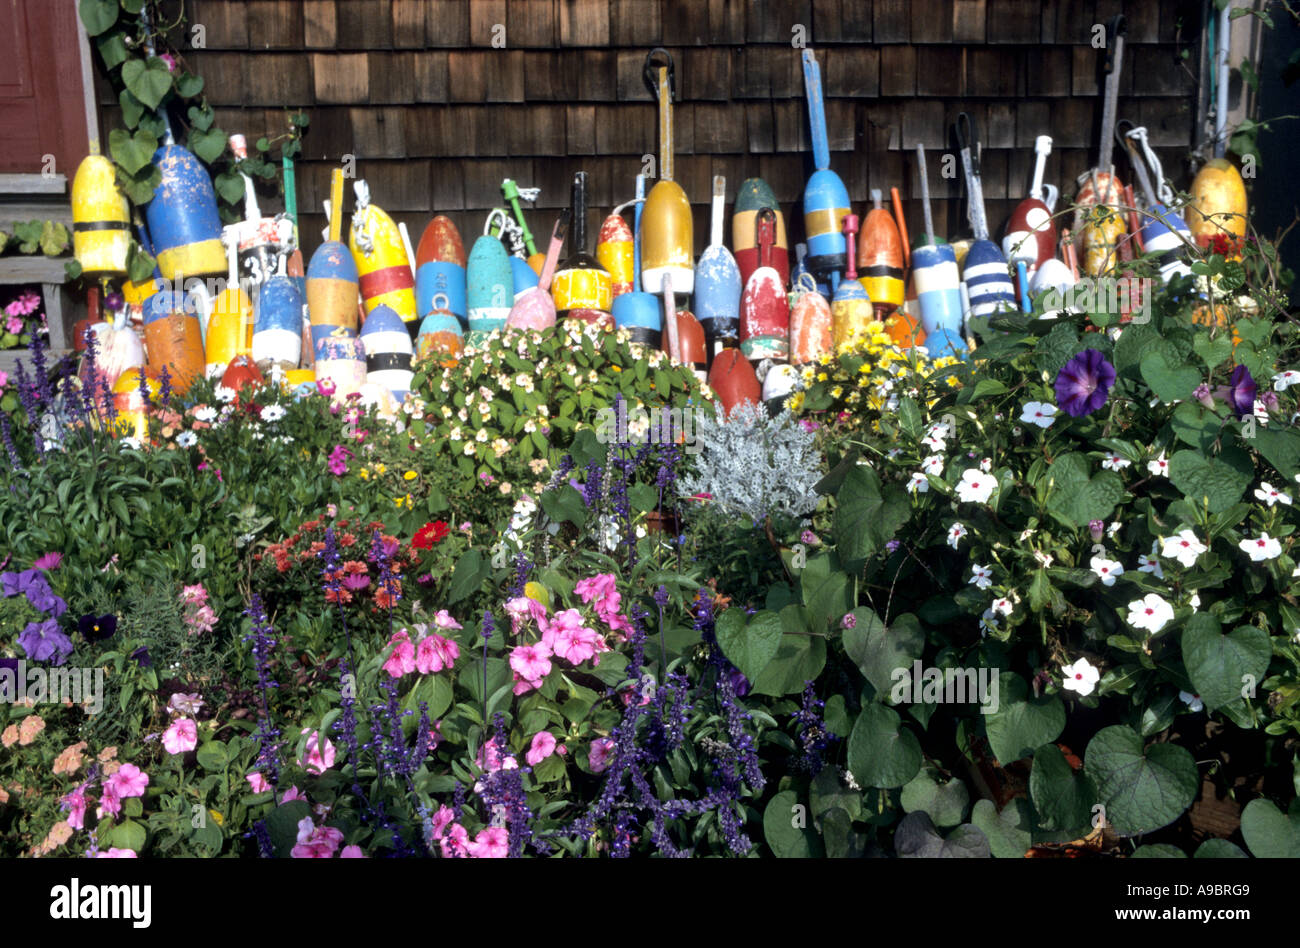 Brightly coloured fishing floats decorate a garden in Rockport Massachusetts USA Stock Photo